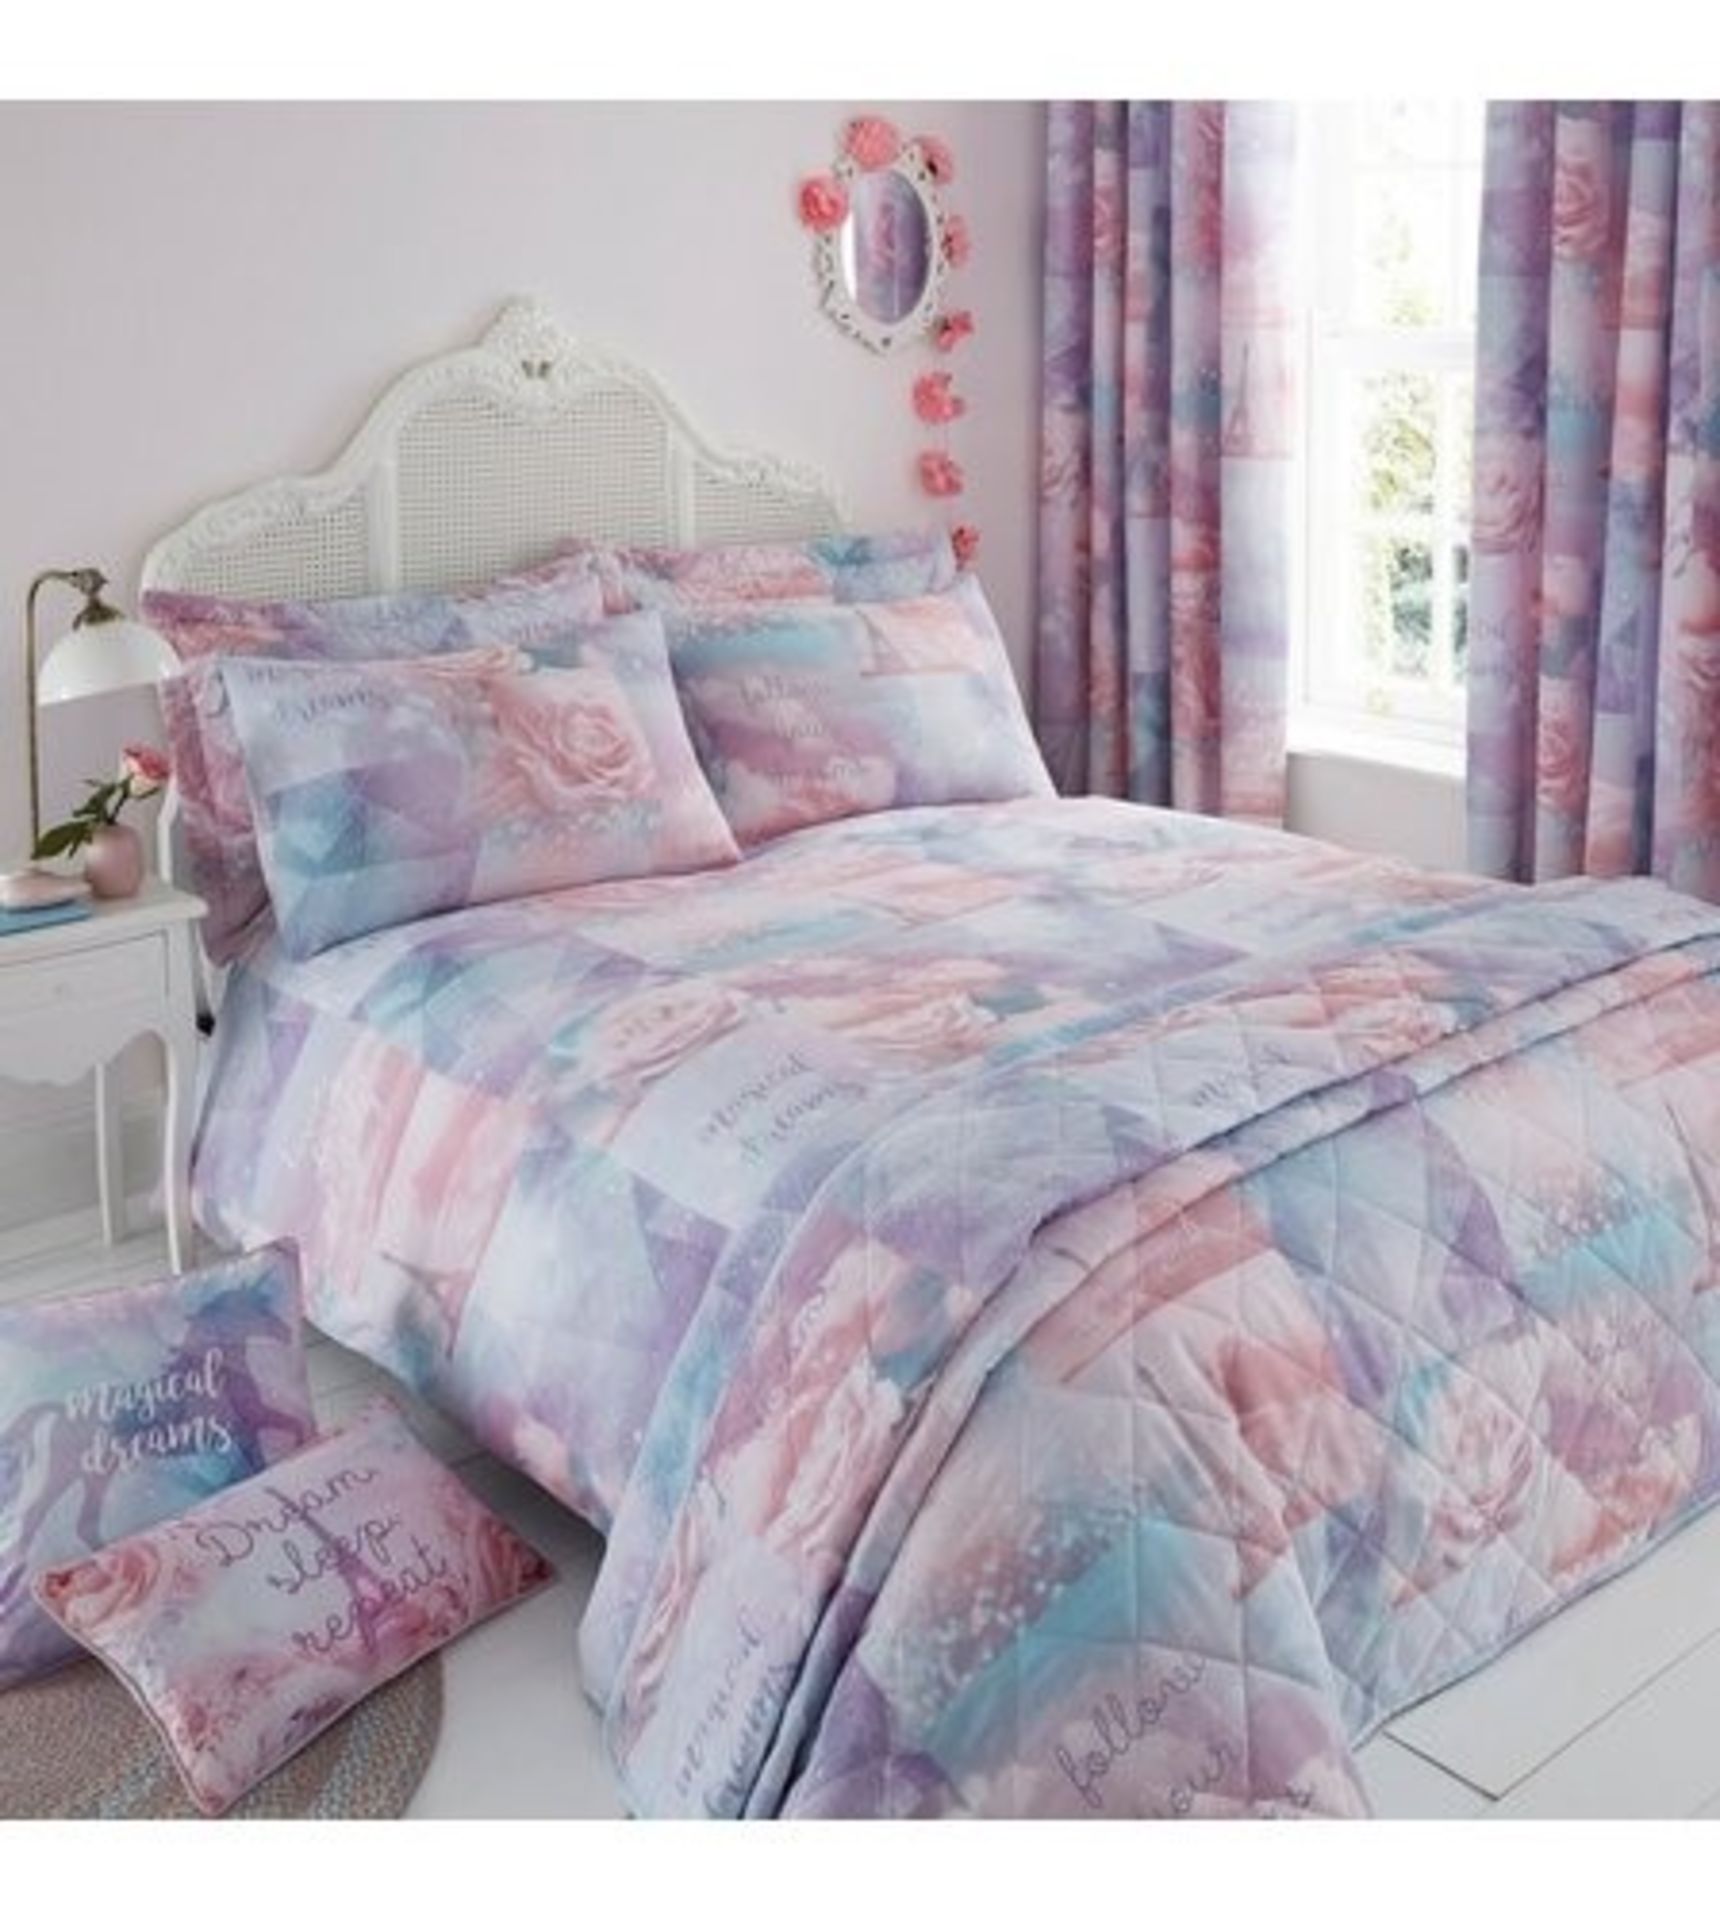 1 PACKAGED MAGICAL DREAMS FULLY LINED PENCIL PLEAT CURTAINS / 66 X 72 (VIEWING HIGHLY RECOMMENDED)